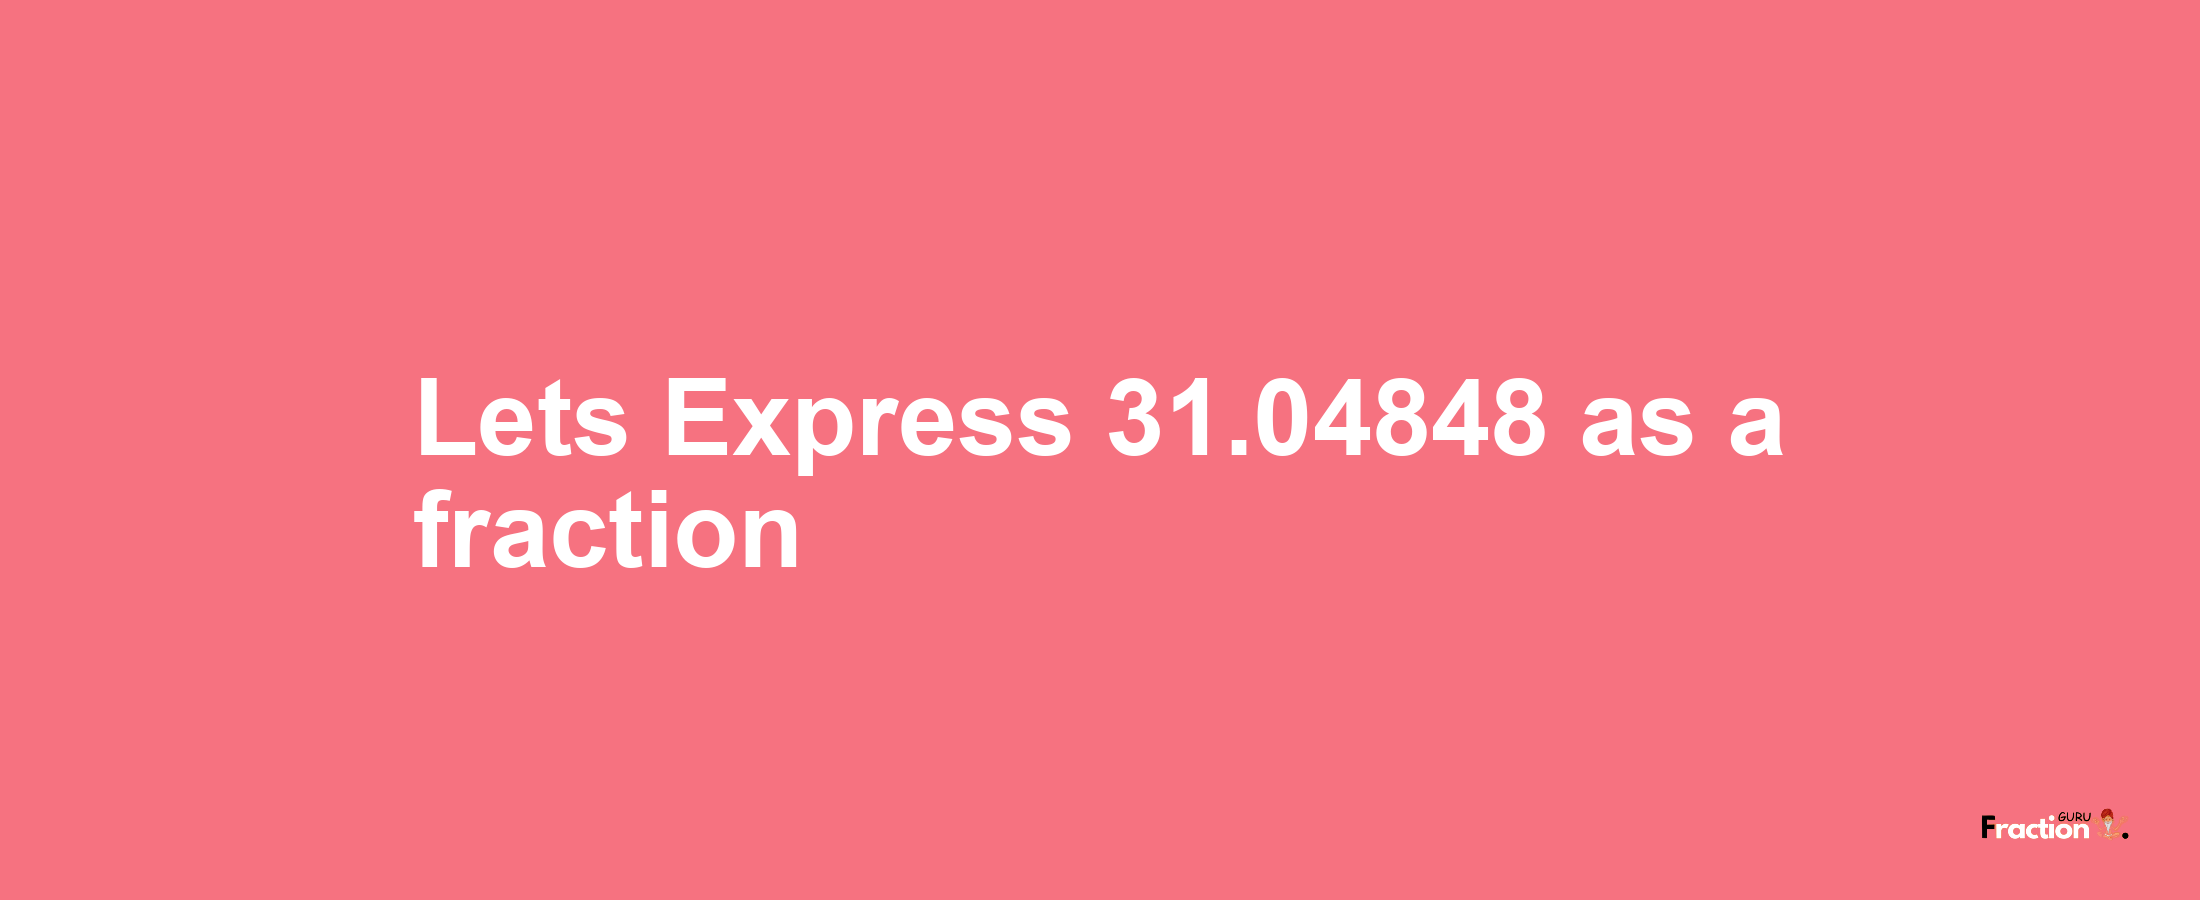 Lets Express 31.04848 as afraction